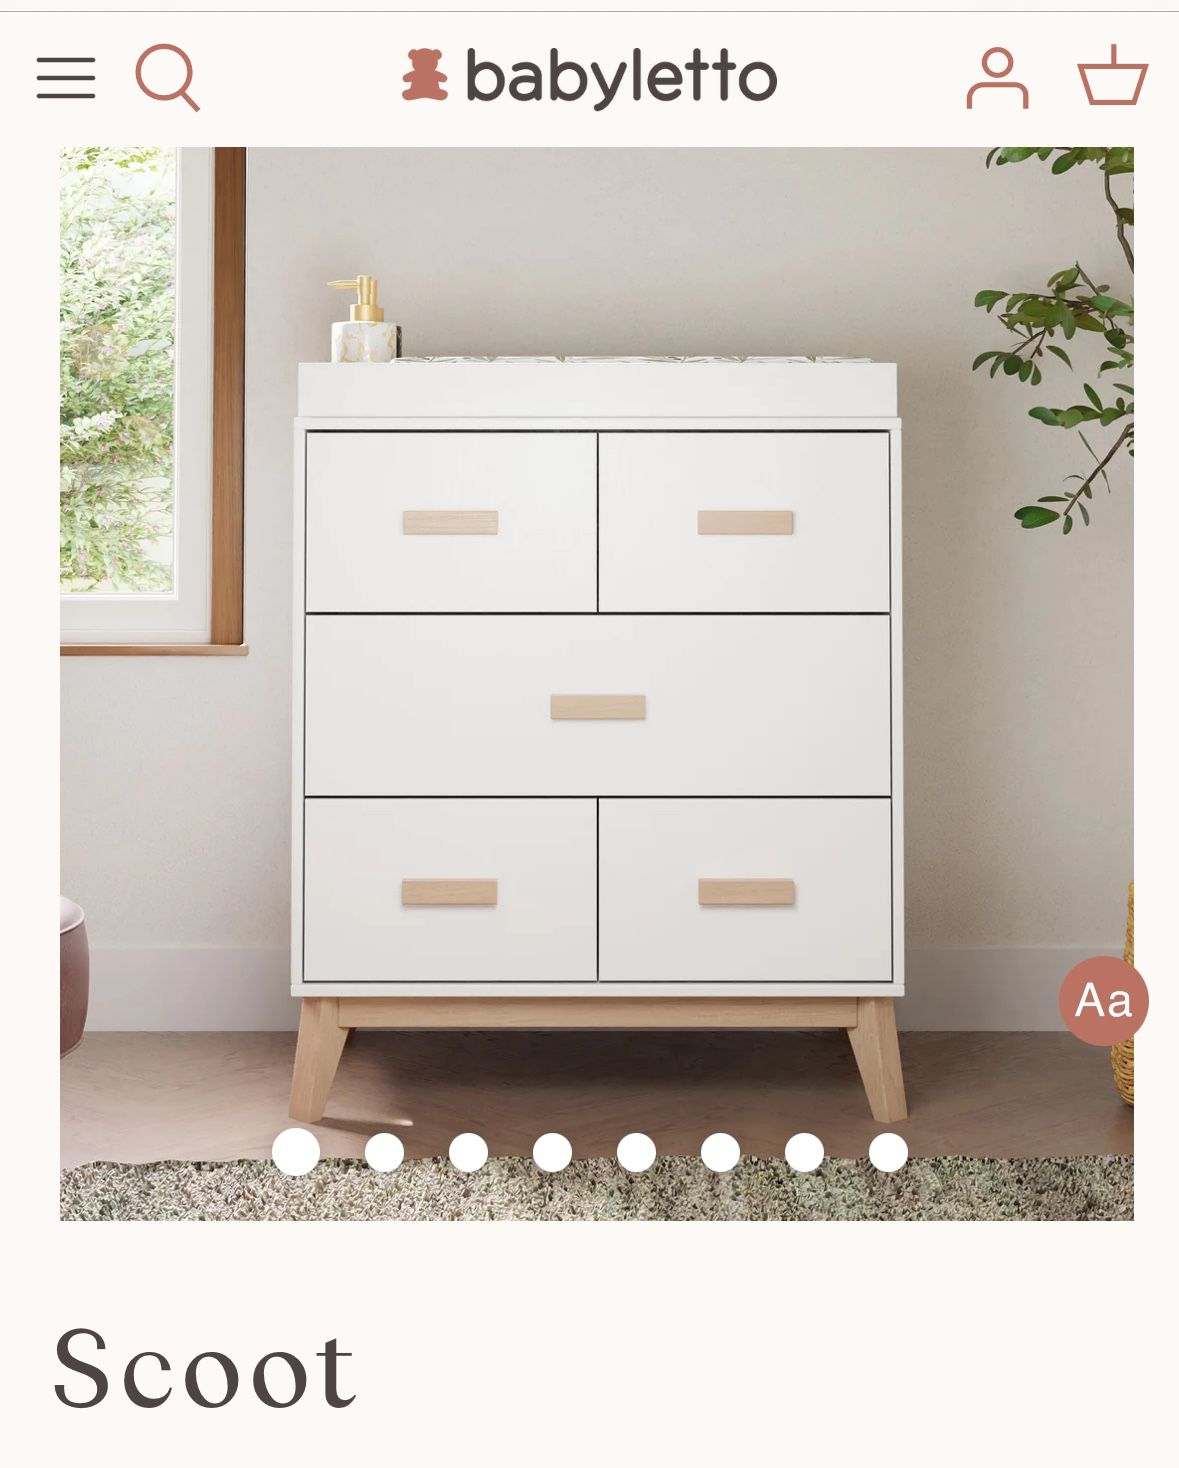 Babyletto Scoot Dresser/Changing Table/Changing Pad